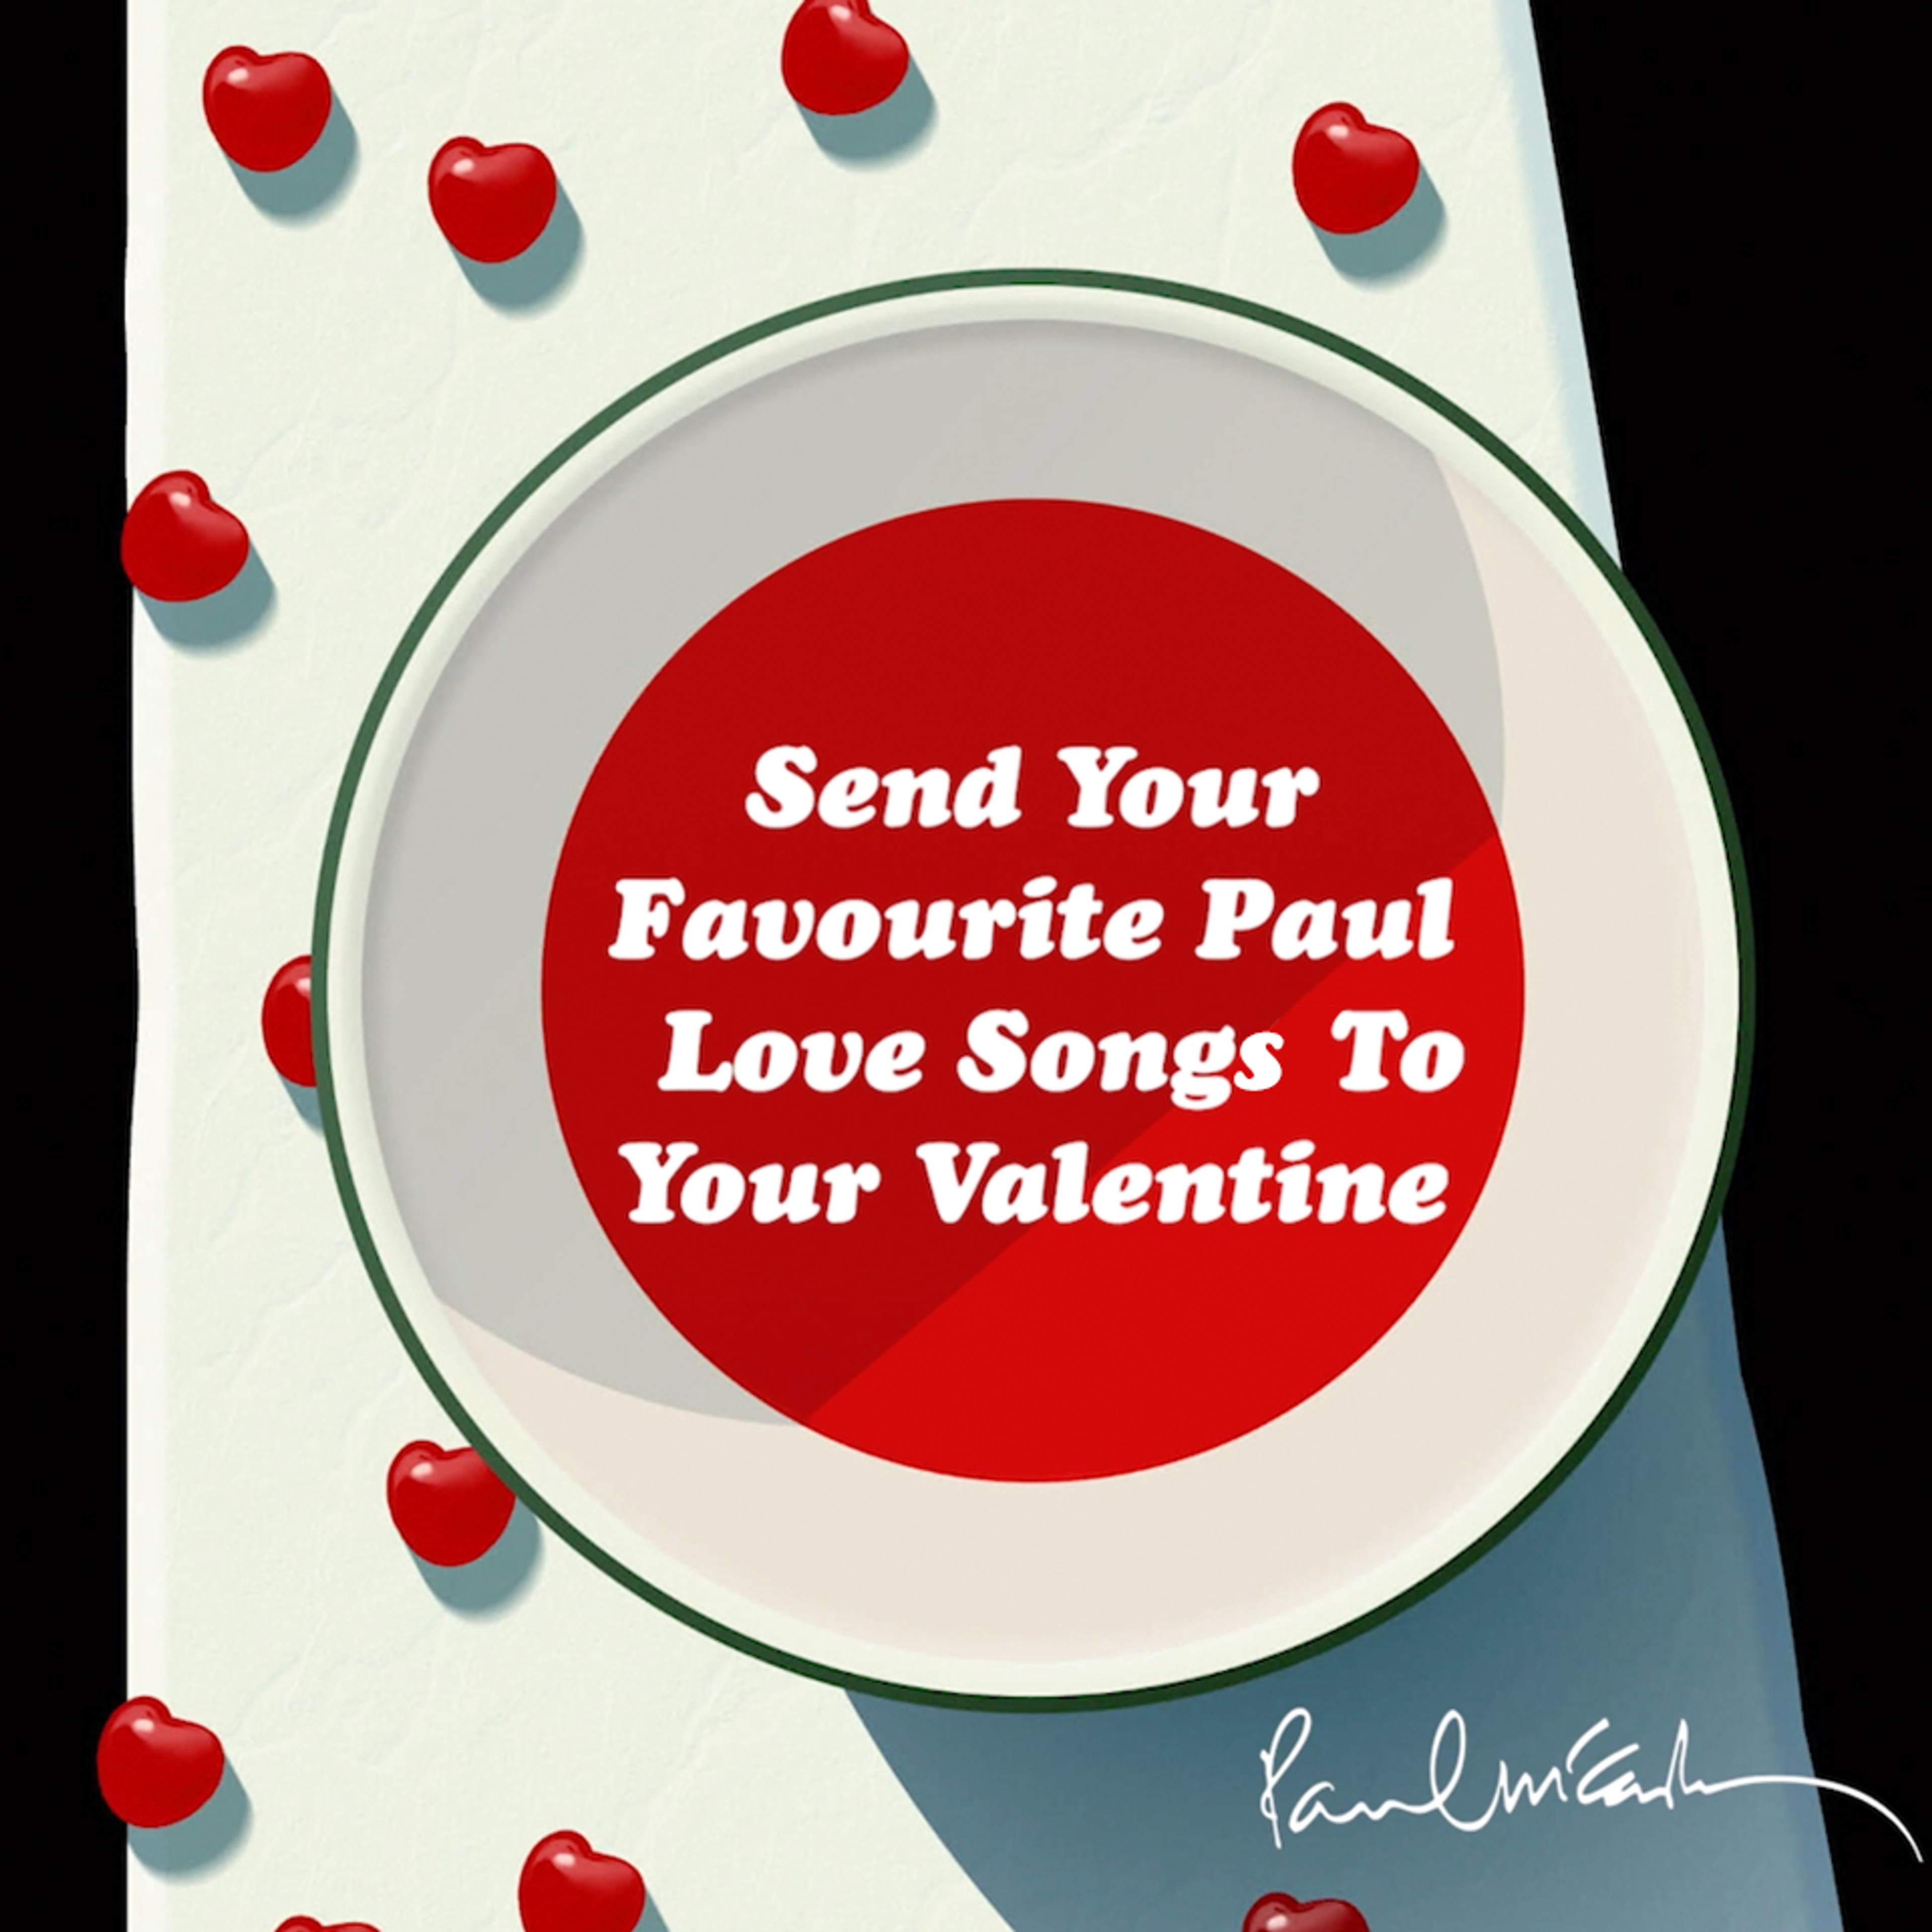 Send your favourite Paul love songs